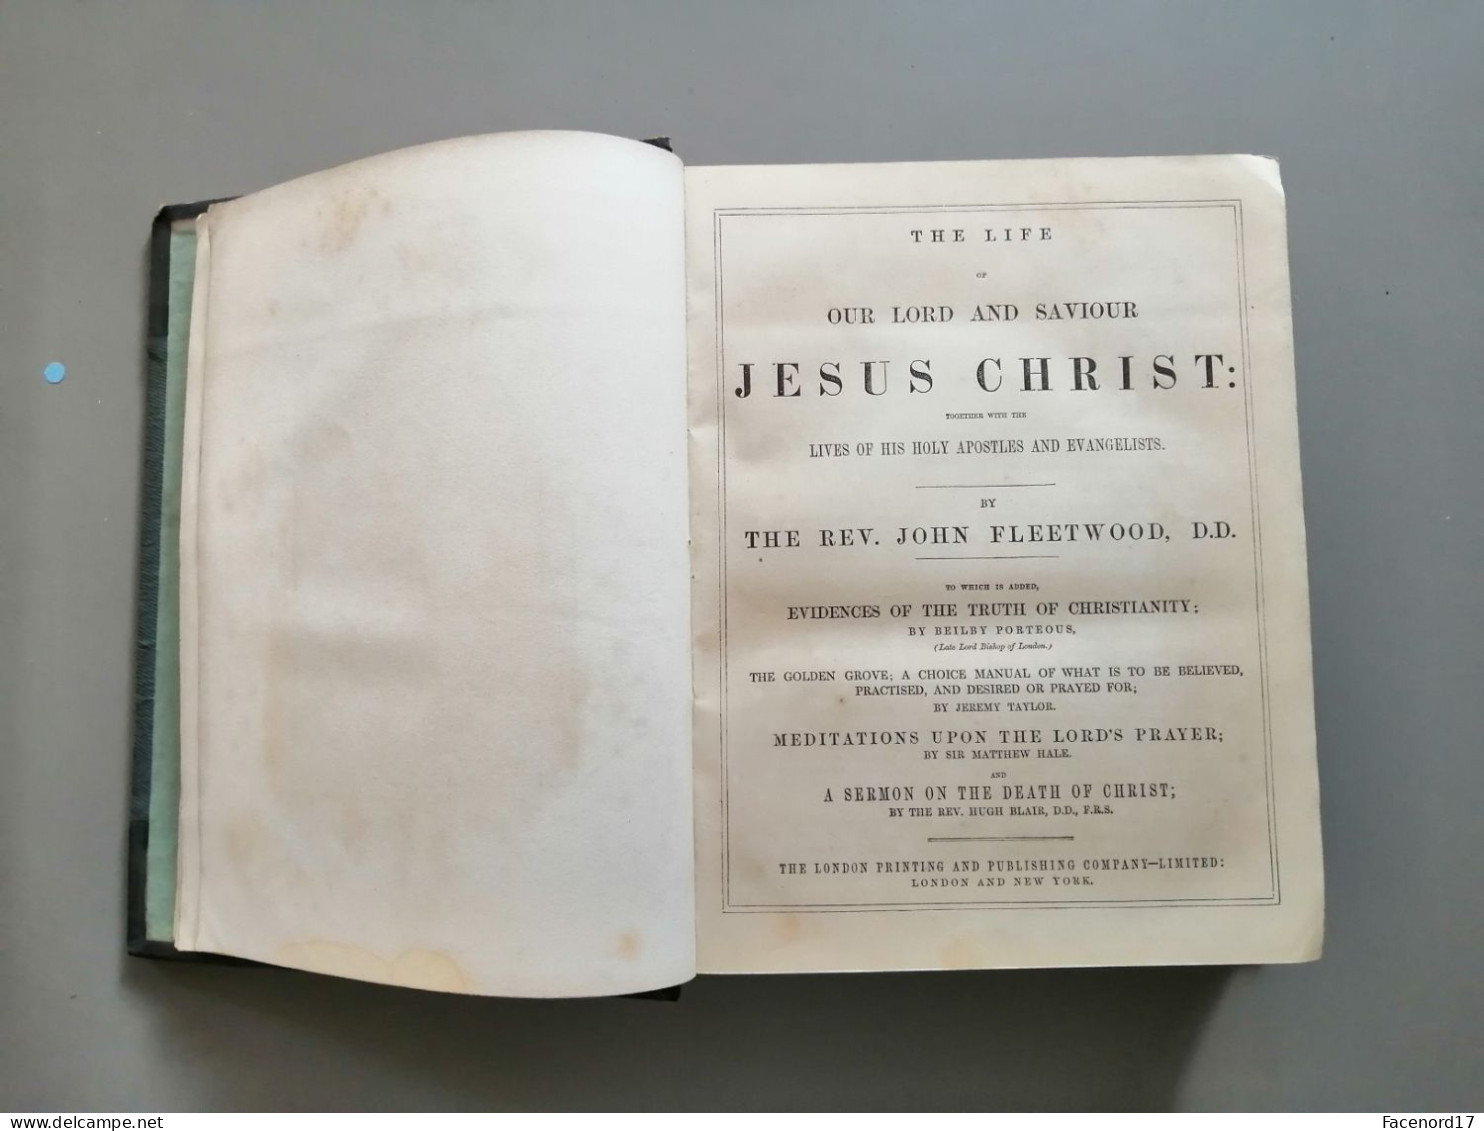 The life of our lord and saviour Jésus Christ by John Fleetwood  the London printing and publishing company-limited